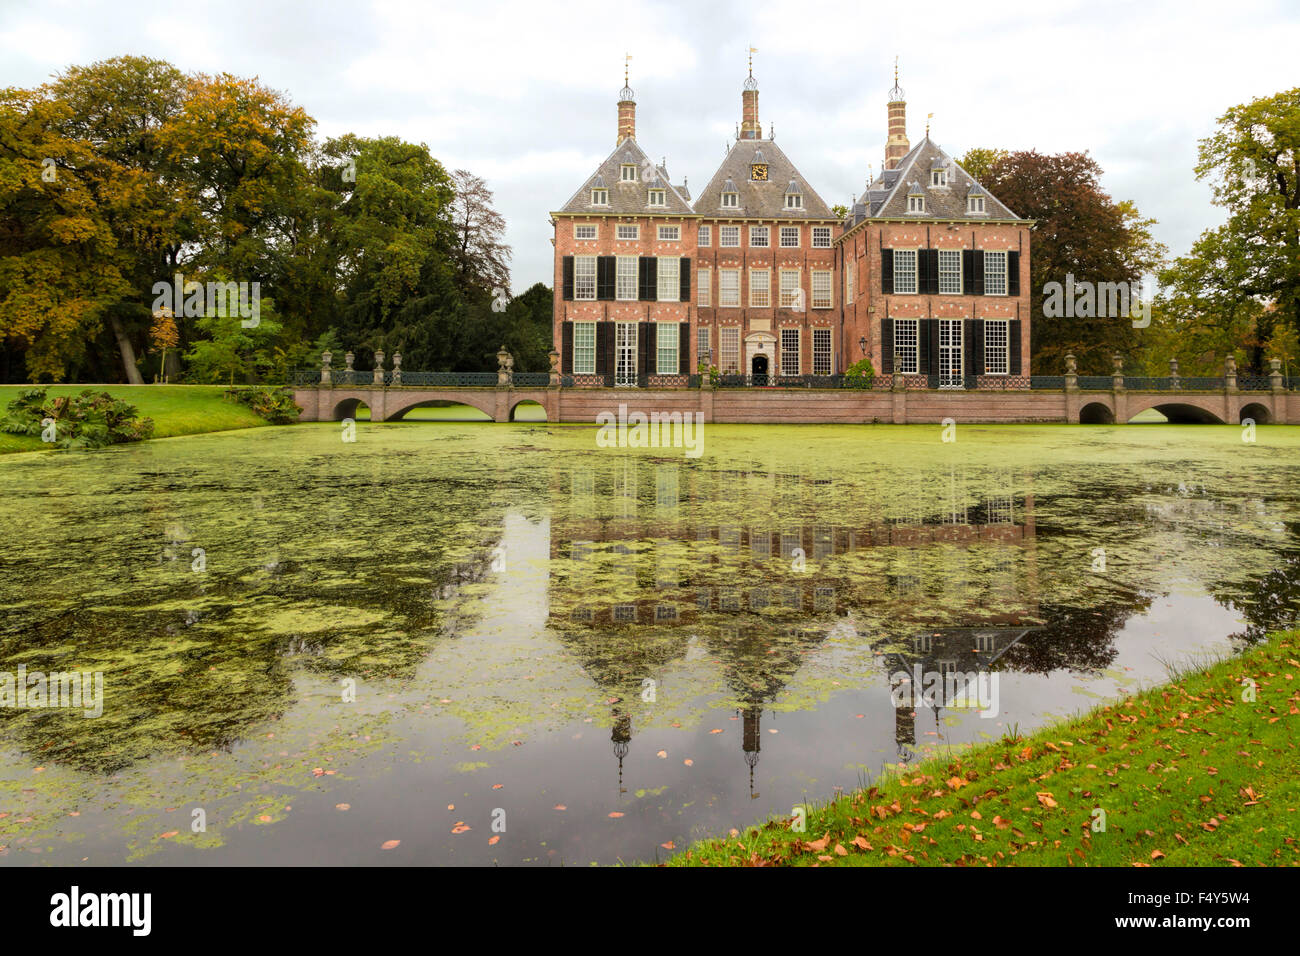 Front view of Duivenvoorde Castle, Voorschoten, South Holland, The Netherlands. Build in 1631 with an English landscape park. Stock Photo